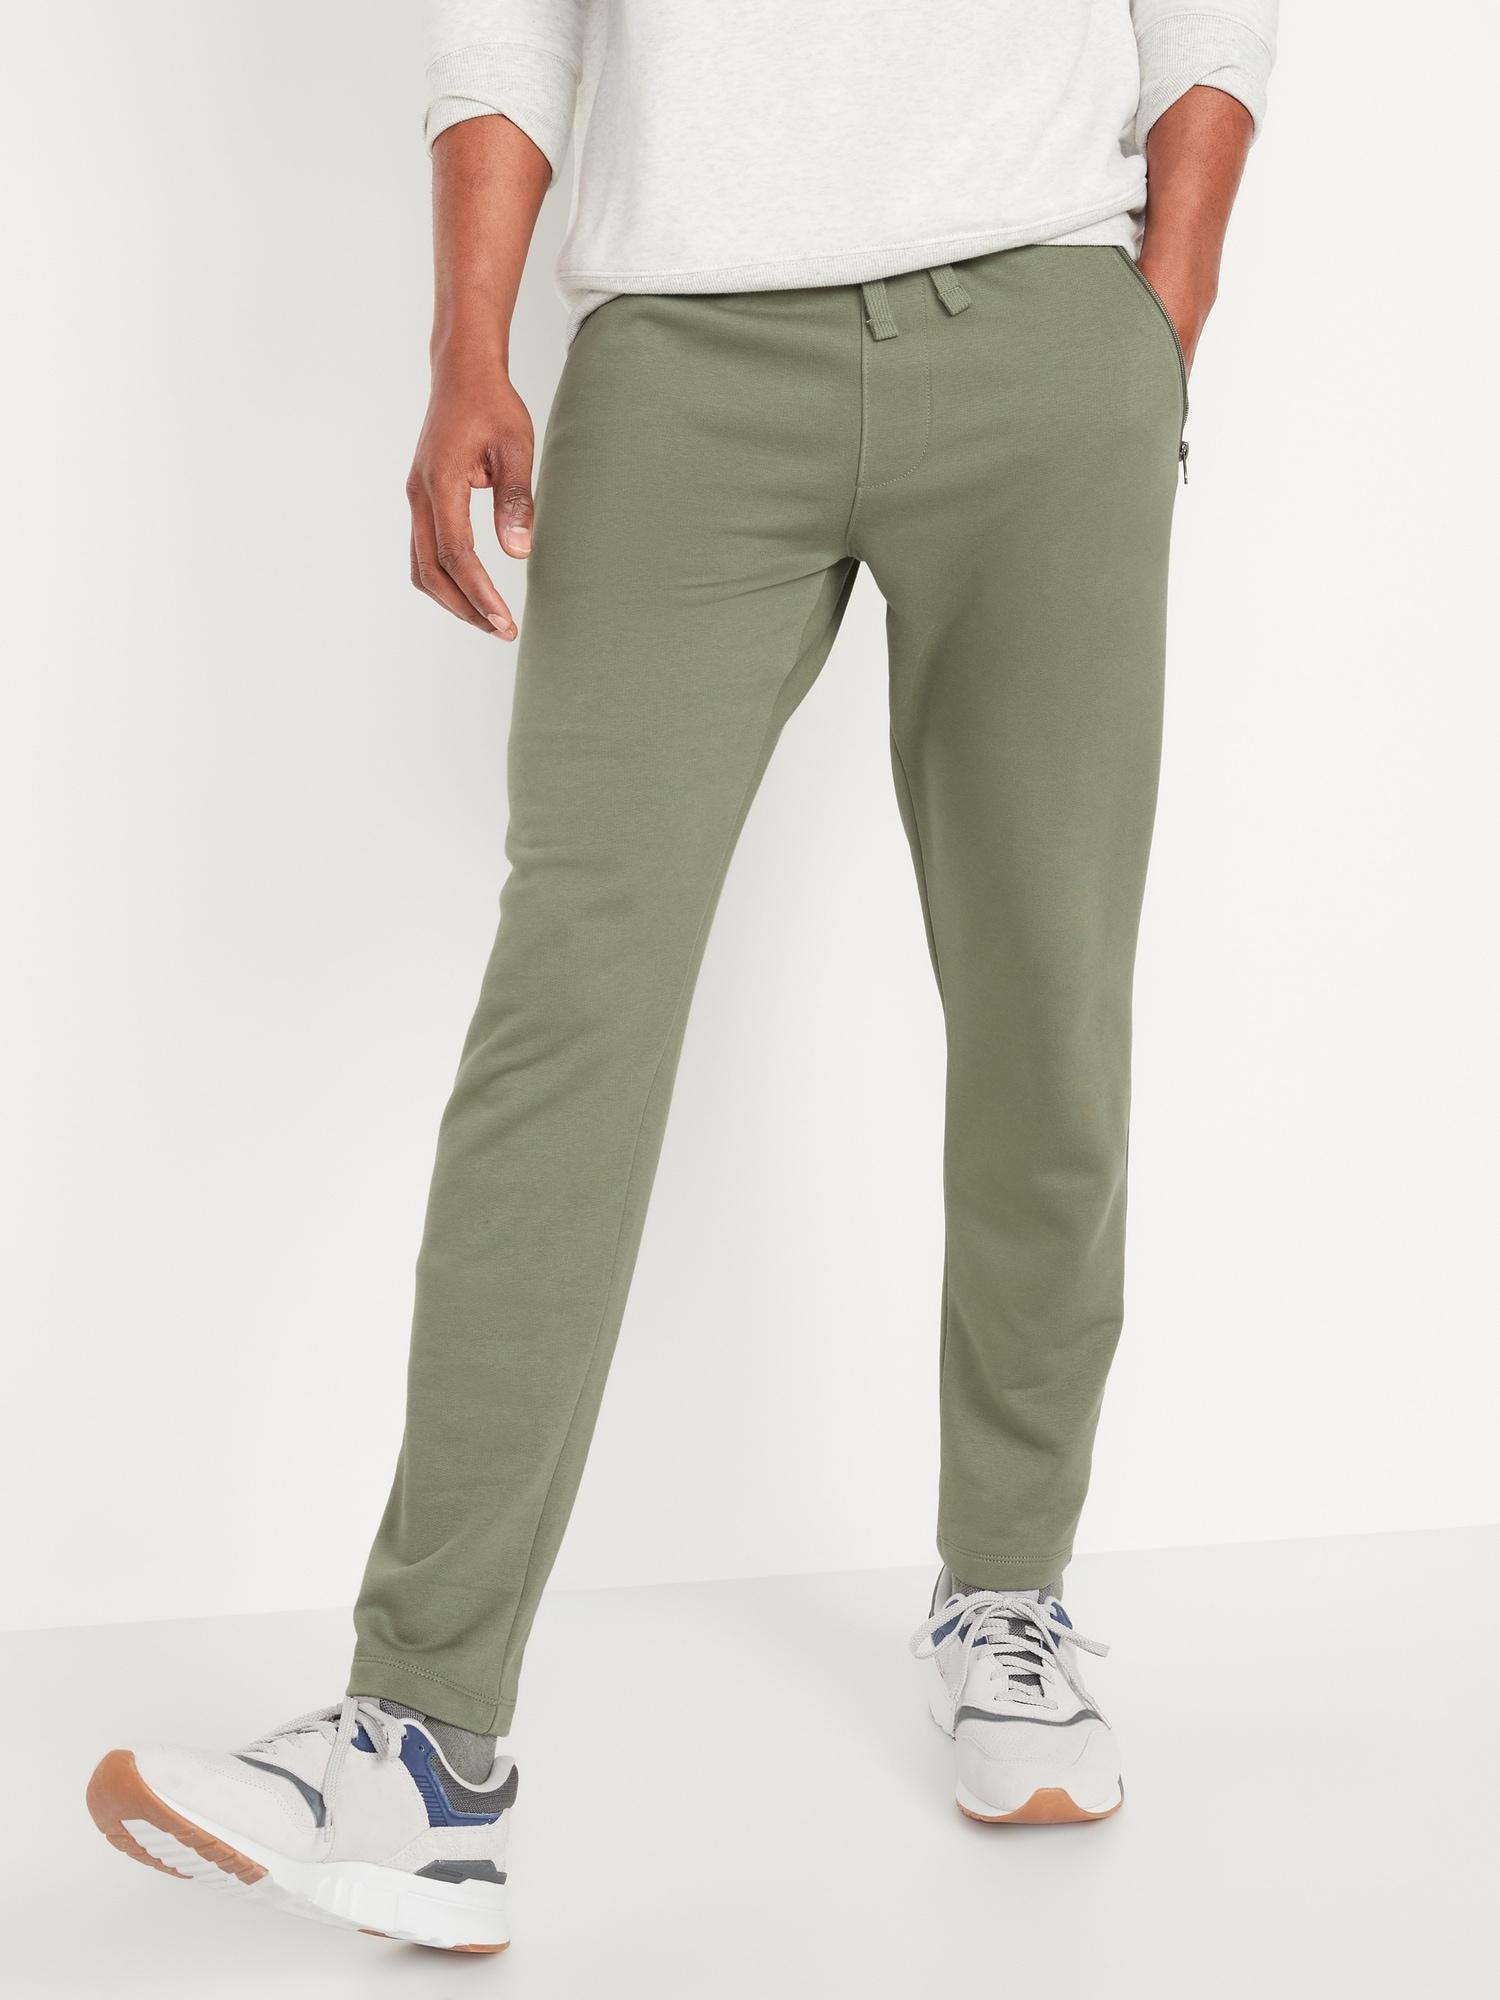 Old Navy Tapered Straight French Terry Jogger Sweatpants for Men green. 1